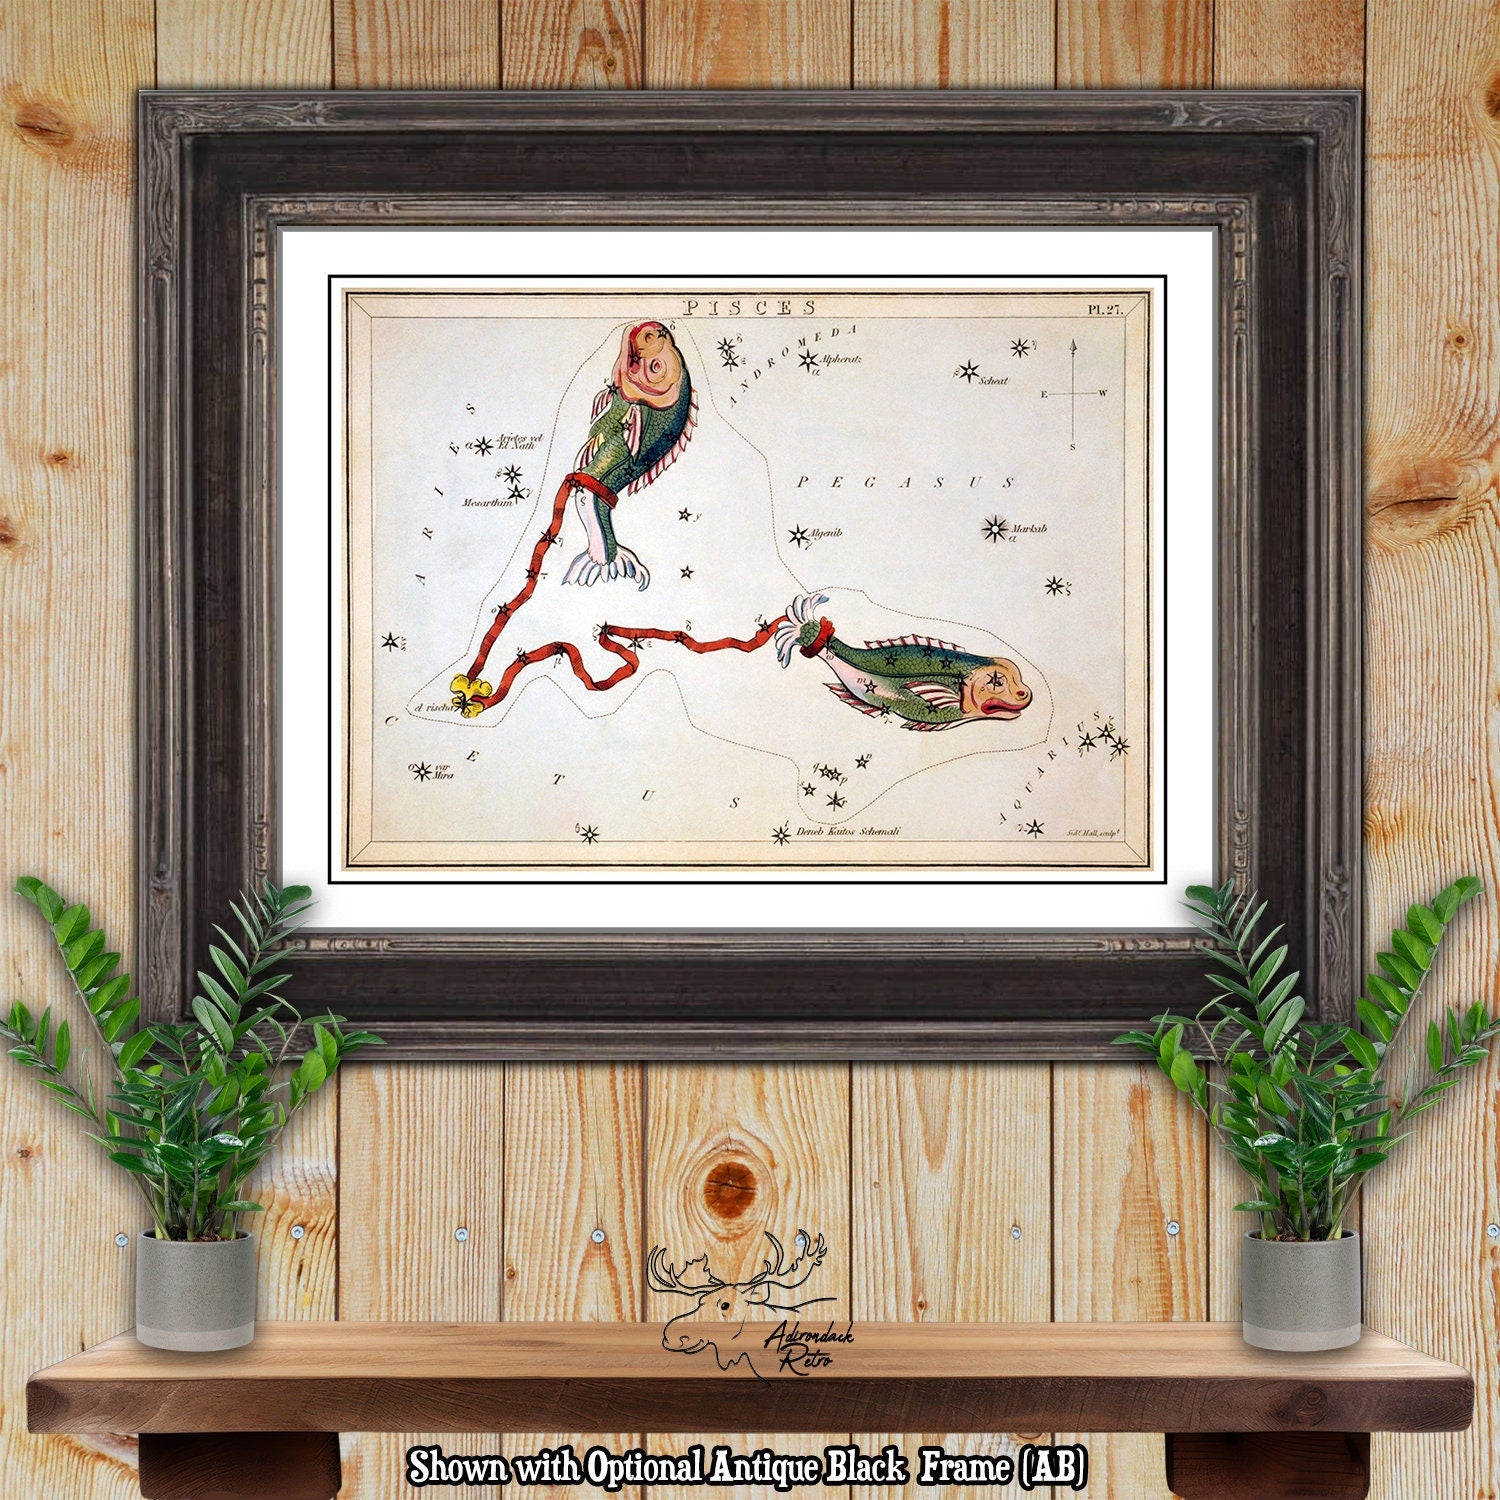 Pisces Constellation Star Map by Sidney Hall Fine Art Astrology Print at Adirondack Retro